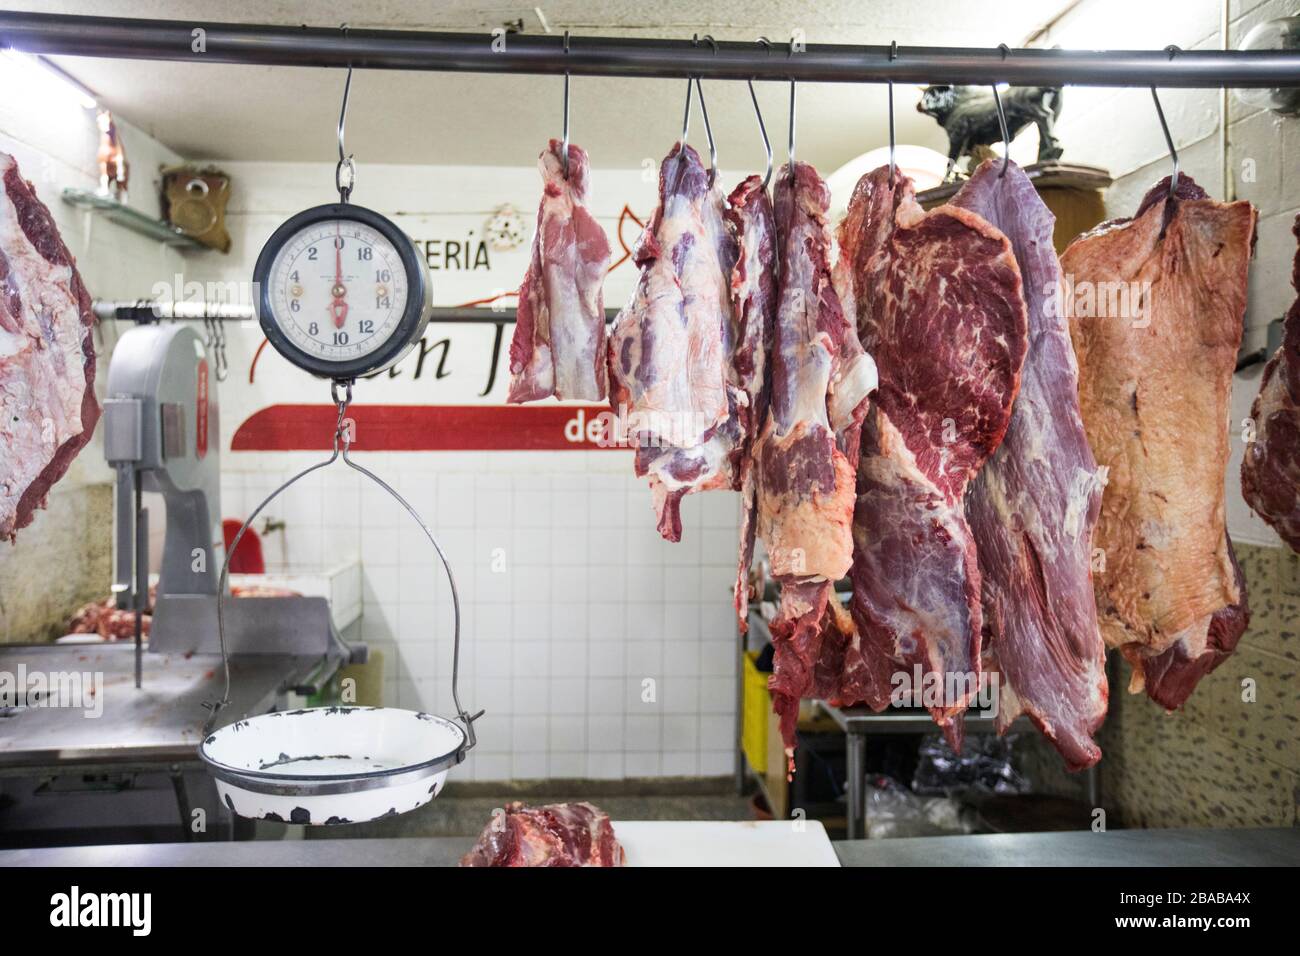 Meat and scale hanging on display at market butcher shop Stock Photo - Alamy